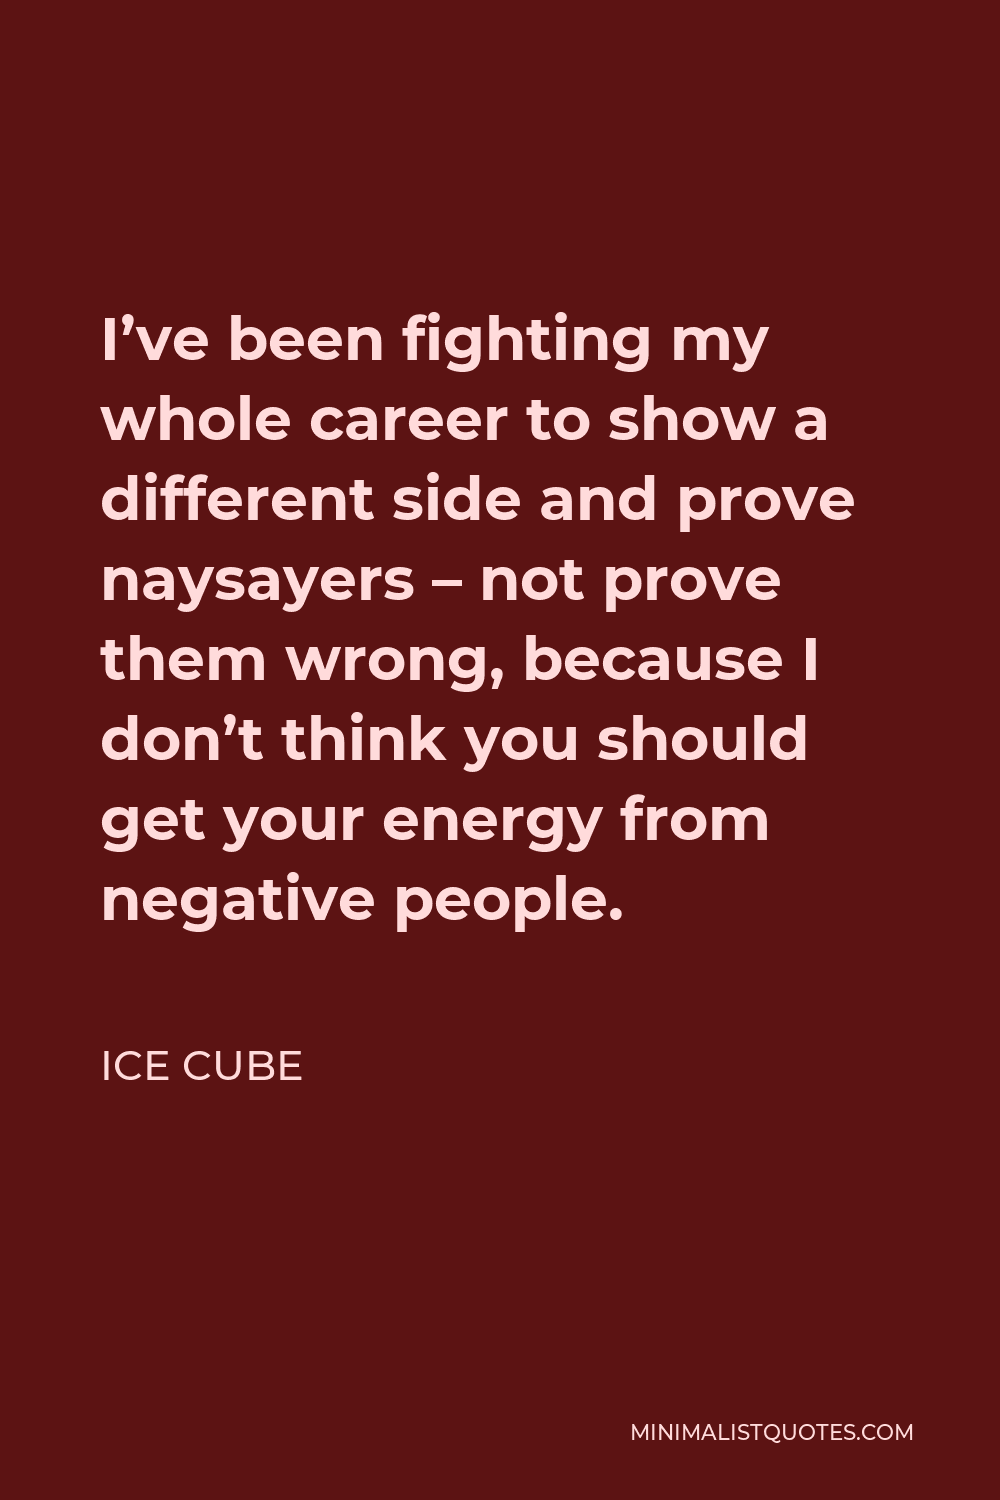 Ice Cube Quote - I’ve been fighting my whole career to show a different side and prove naysayers – not prove them wrong, because I don’t think you should get your energy from negative people.